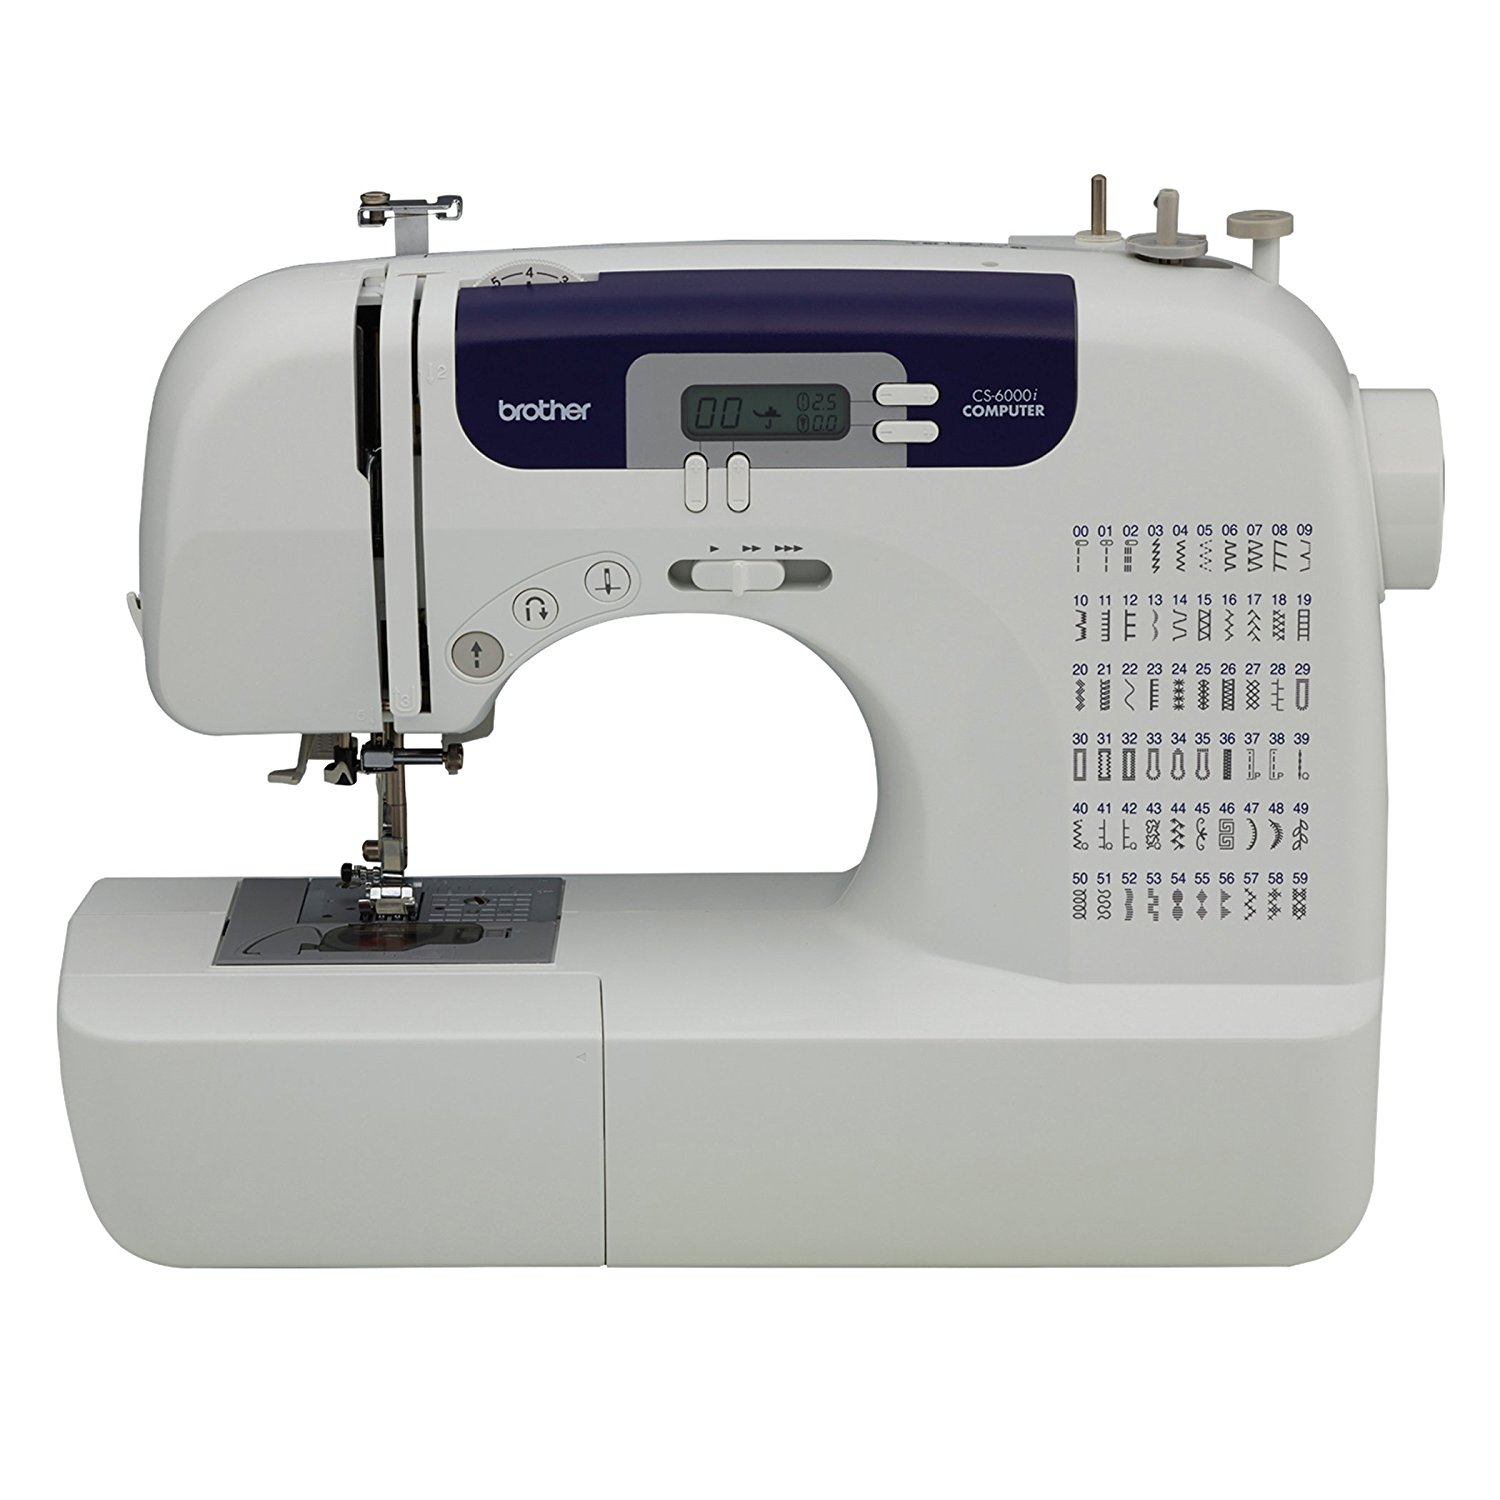 Amazon.com: Brother CS6000i Feature-Rich Sewing Machine With 60 ...